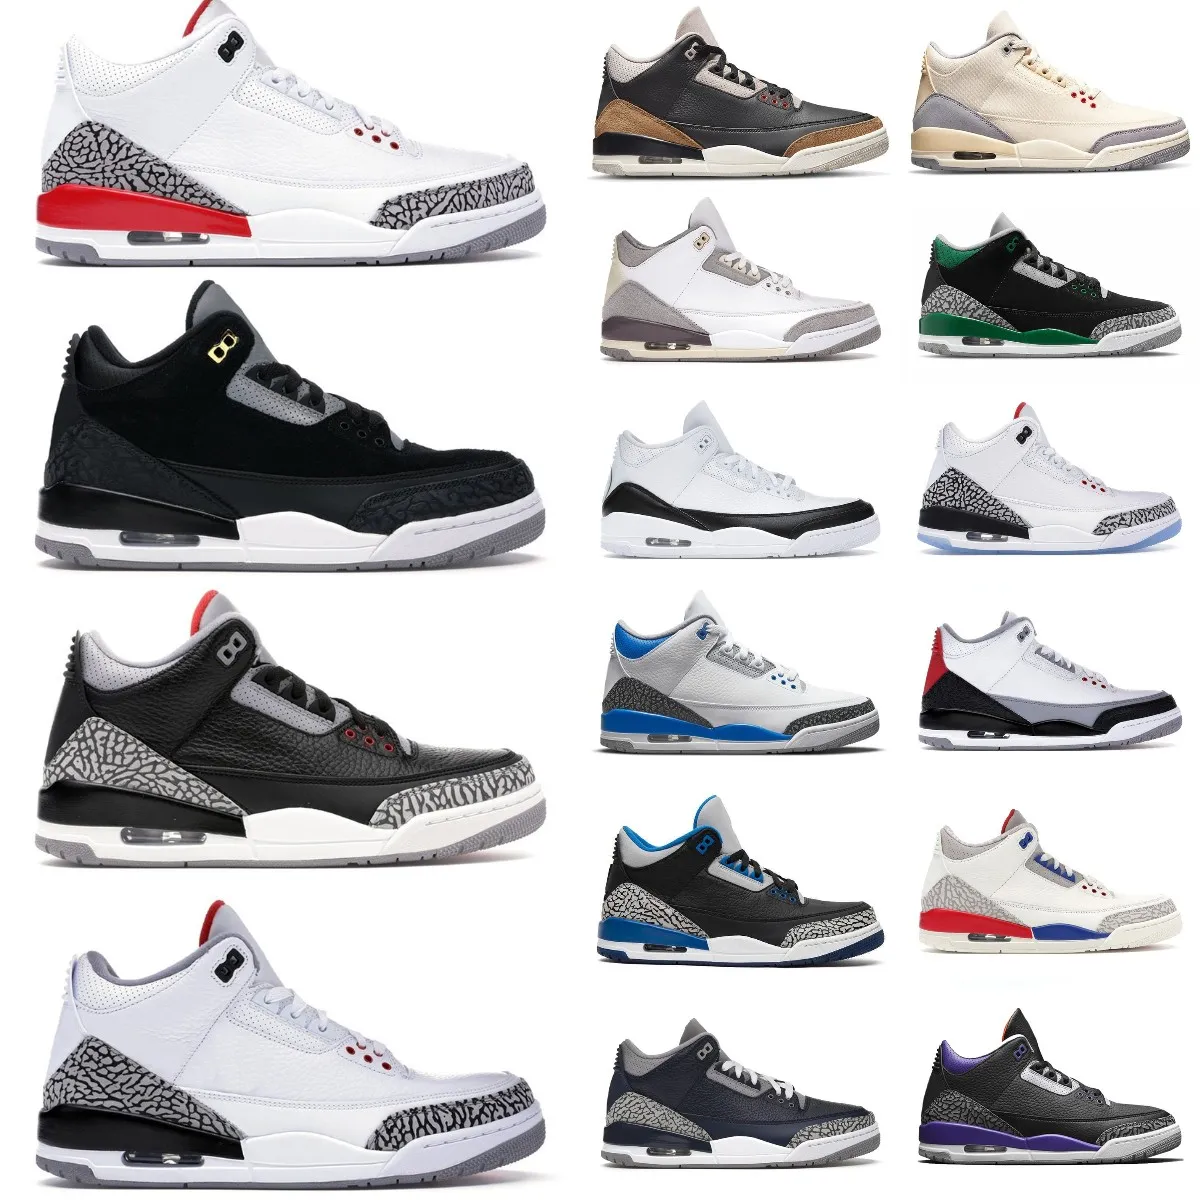 NEW Jumpman Racer Blue 3 3S Basketball Shoes Mens Cool Grey Maniere UNC Fragment Knicks Pine Green FREE THROW LINE Denim Red Black Cement Pure White Trainer Sneakers